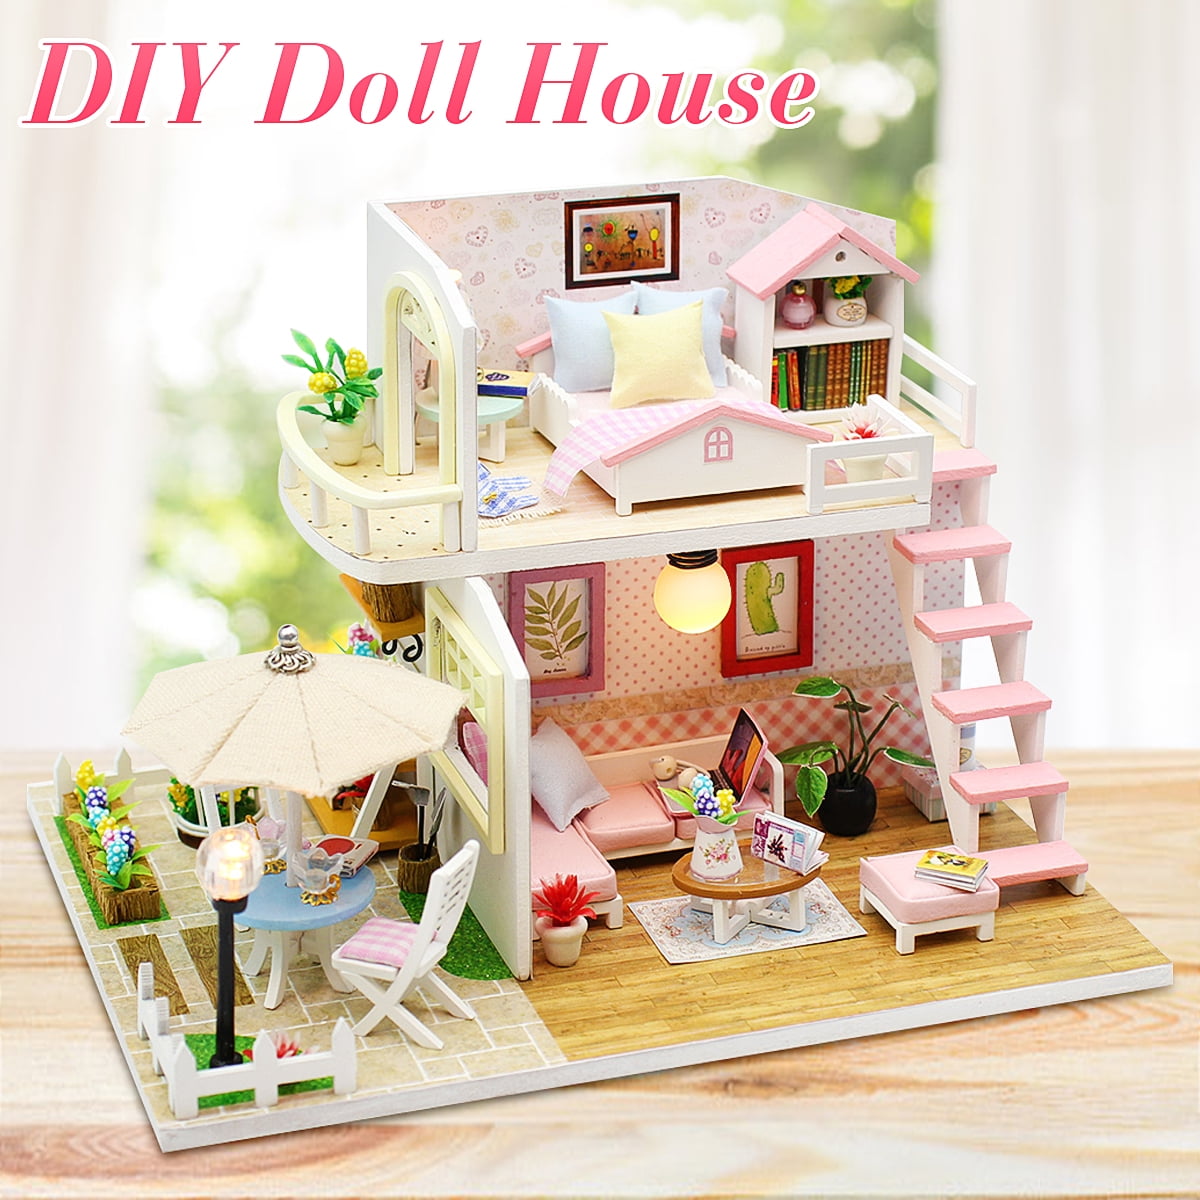 CREATIVE LOVELY CUTE SMALL MINI COLORFUL BOTTLES OF DOLL HOUSE MINIATURE KIT 